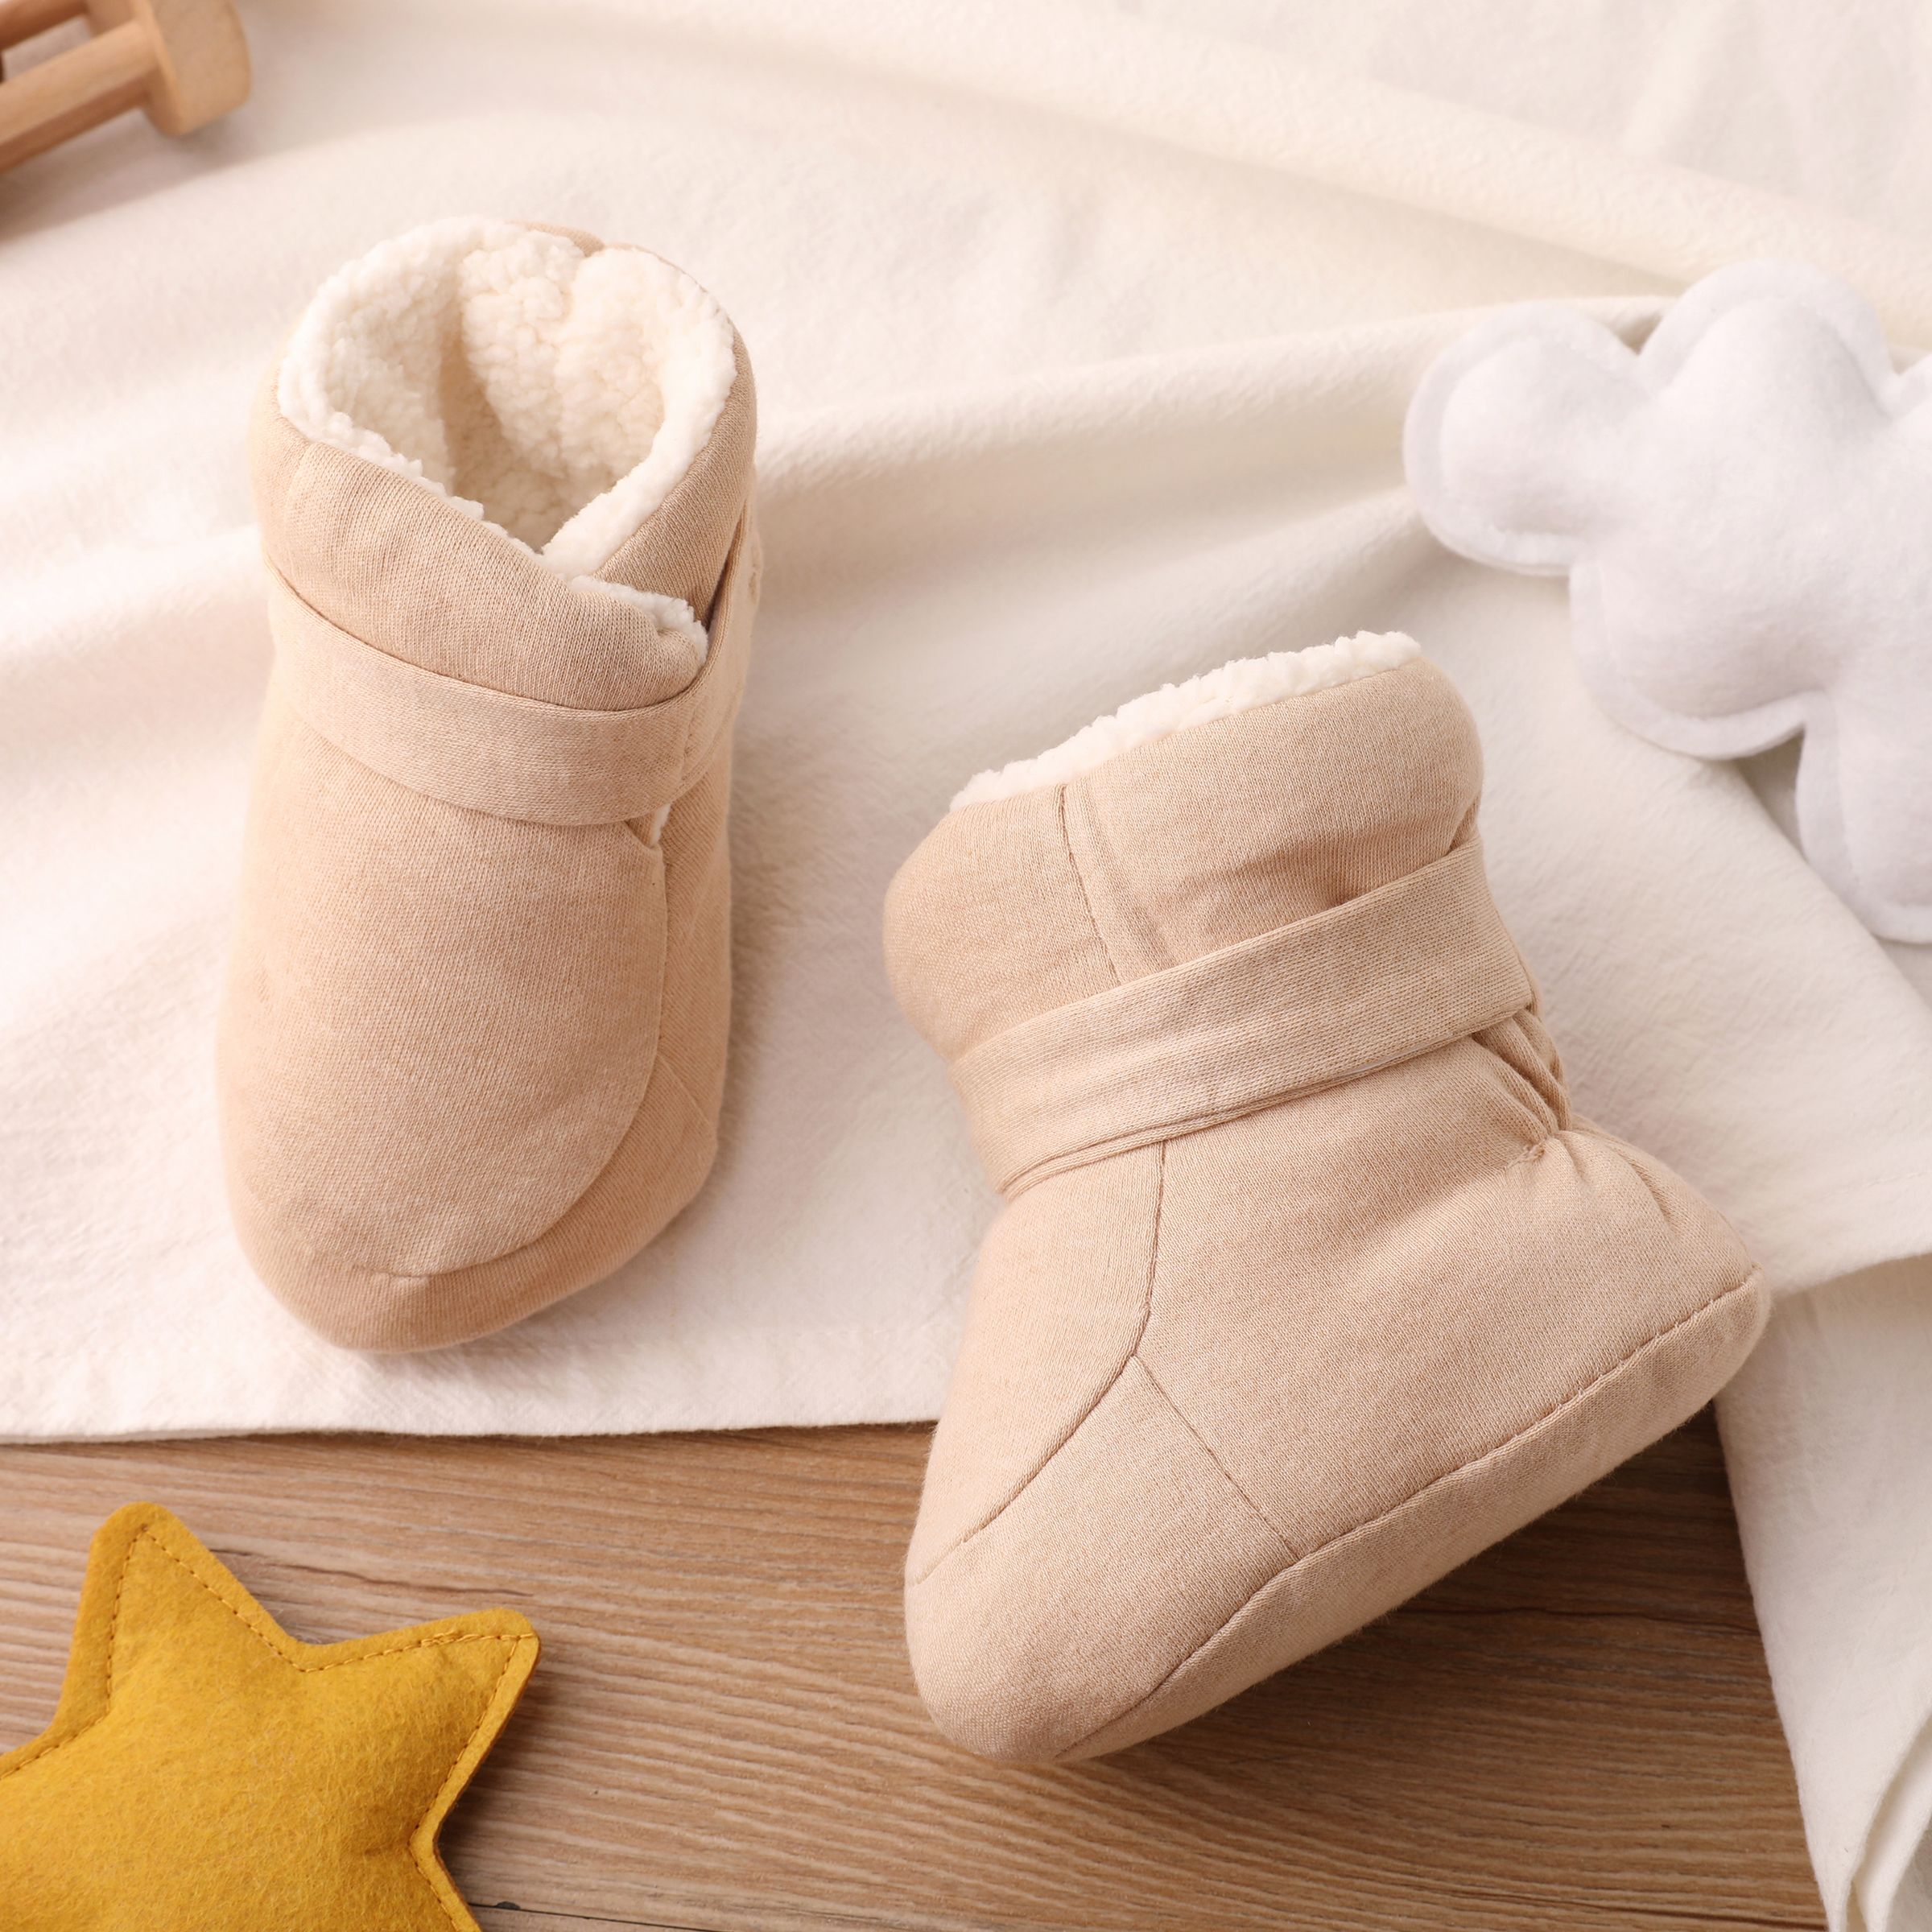 Baby Casual Thickened High-top Soft-soled Polar Fleece Warm Cotton Boots